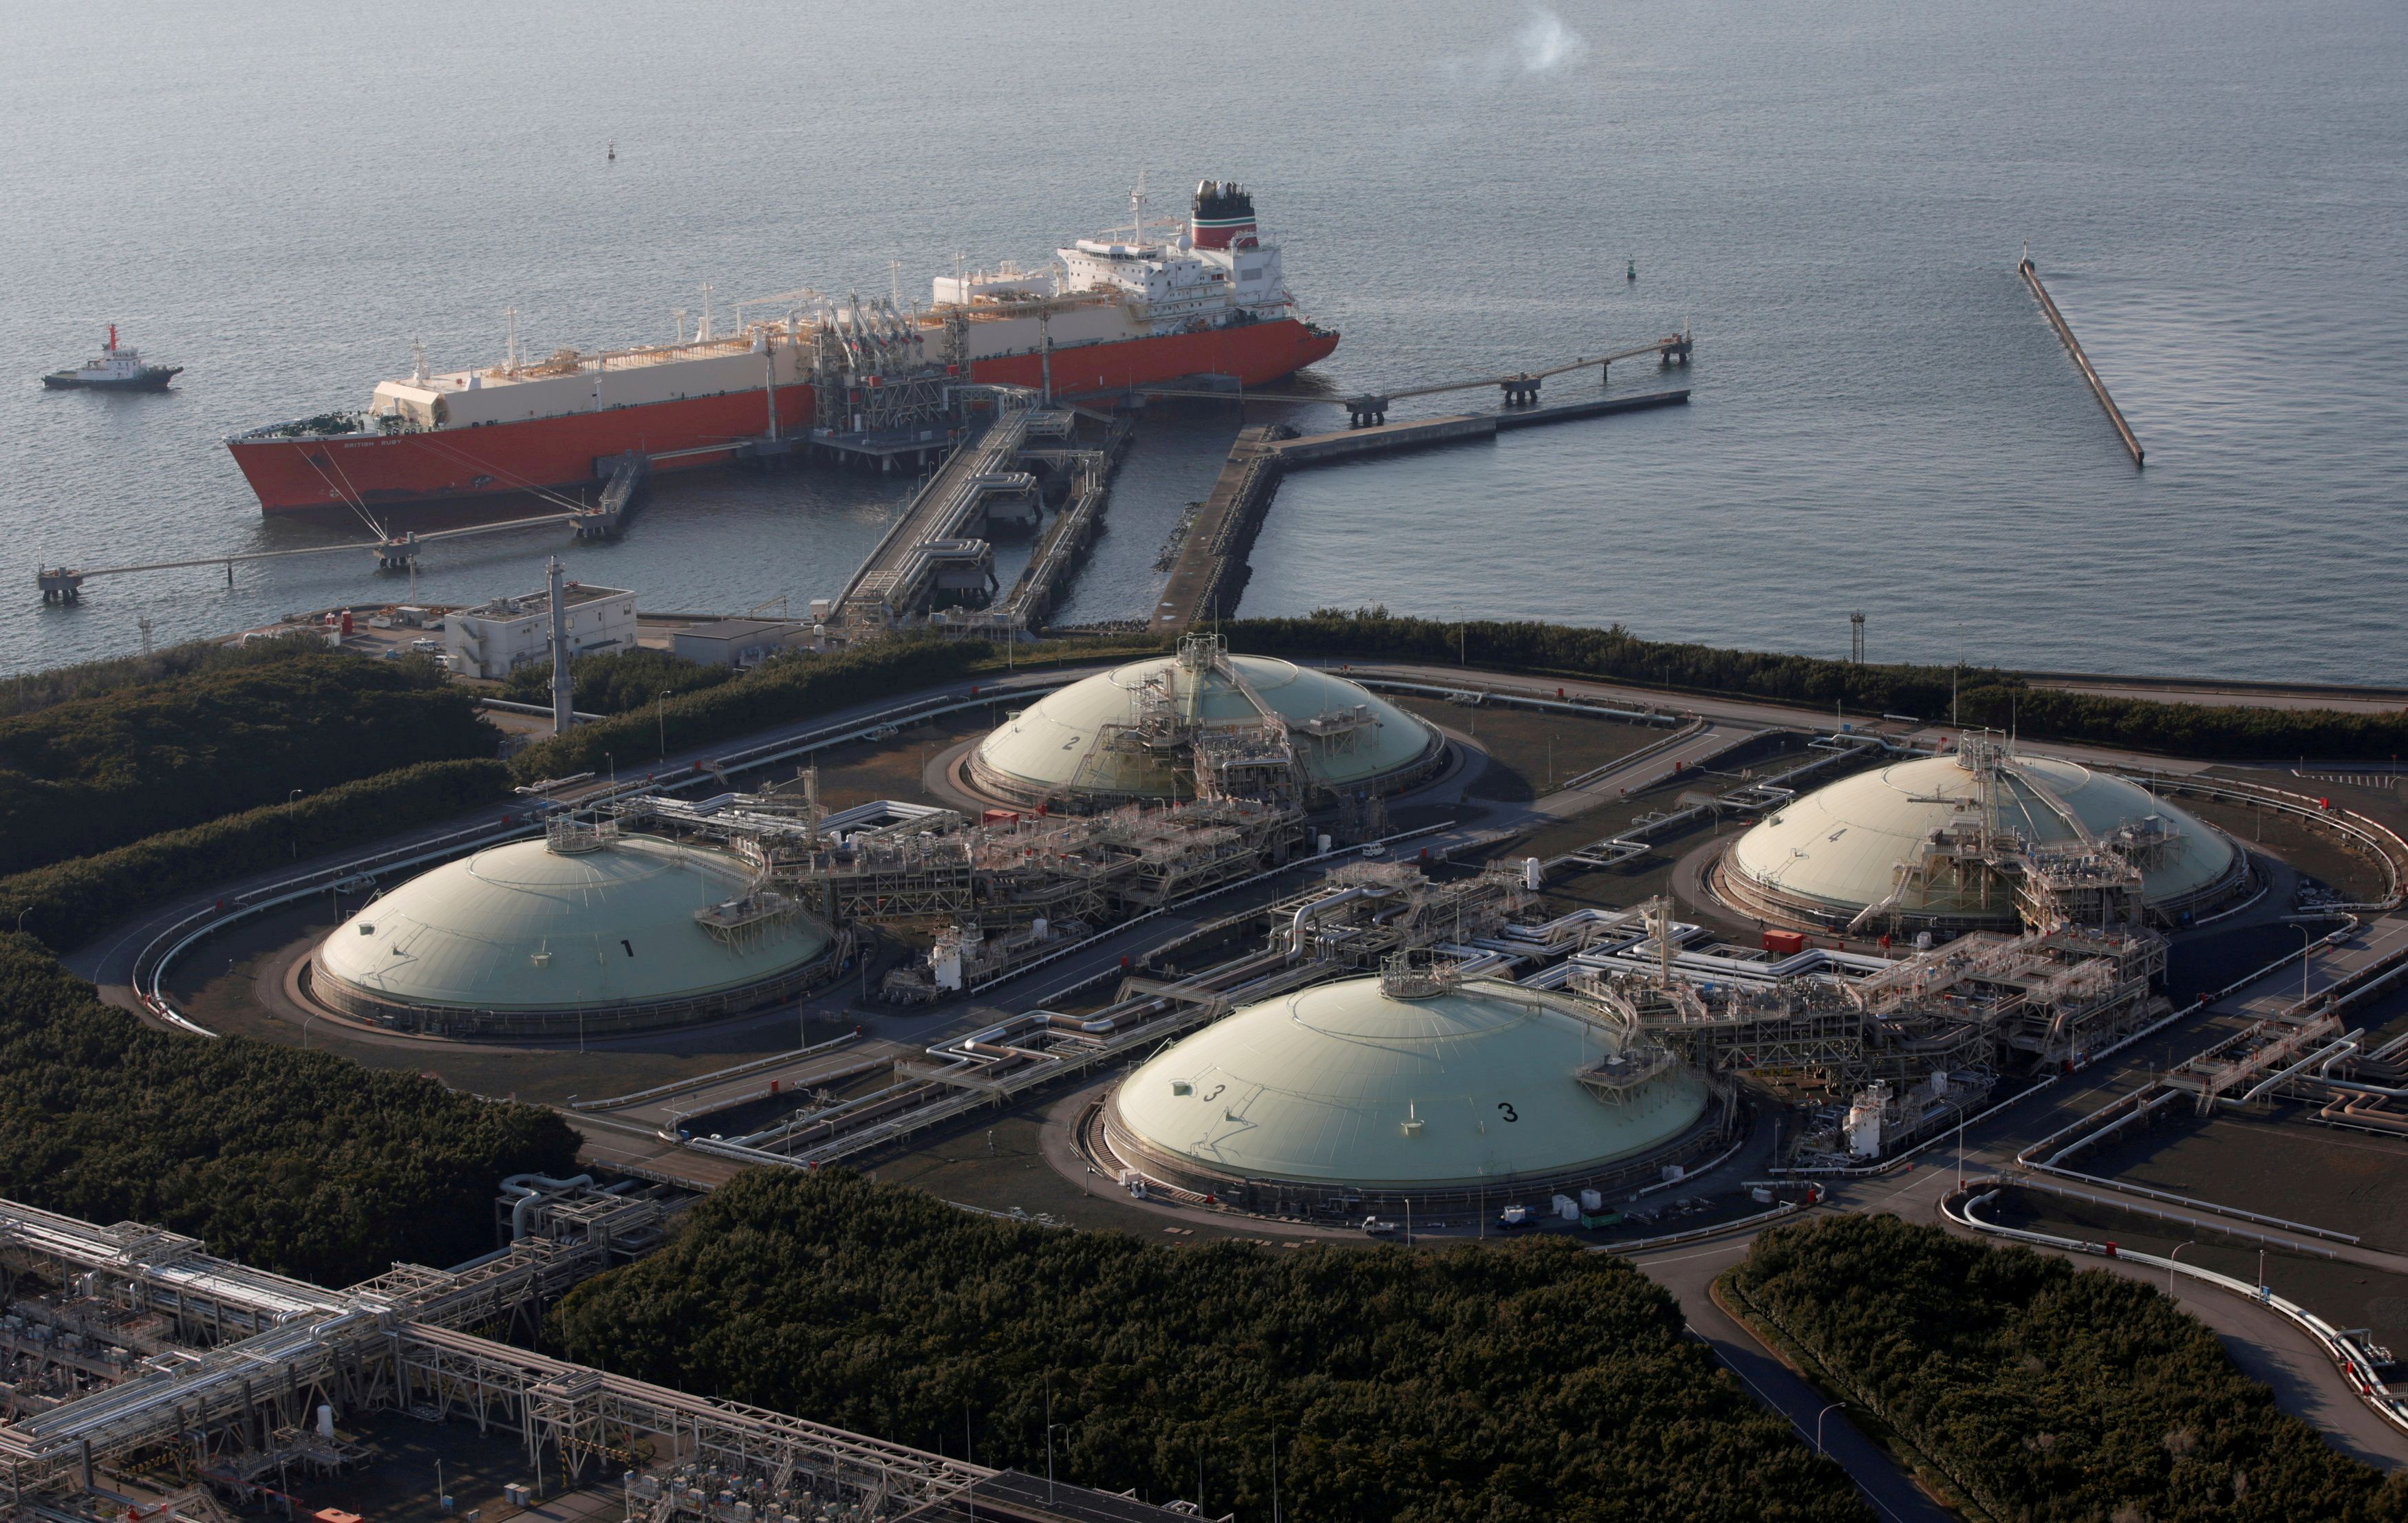 Liquefied natural gas (LNG) storage tanks and a membrane-type tanker are seen at Tokyo Electric Power Co.'s Futtsu Thermal Power Station in Futtsu, east of Tokyo, Japan, February 20, 2013. REUTERS/Issei Kato